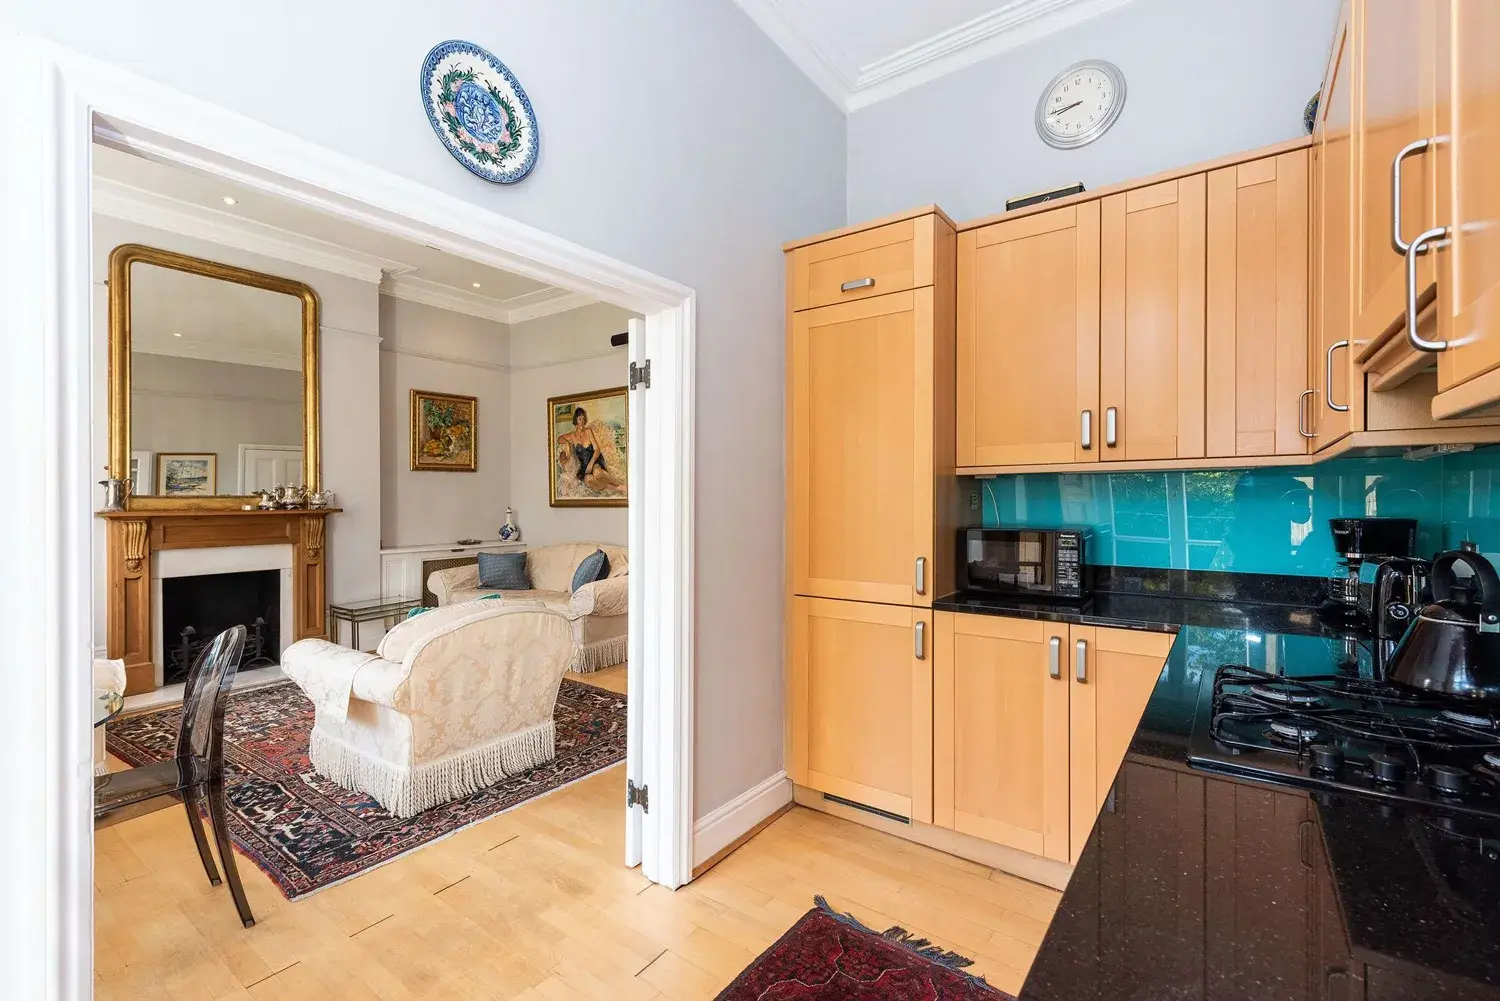 Buckland Crescent, holiday home in Primrose Hill, London